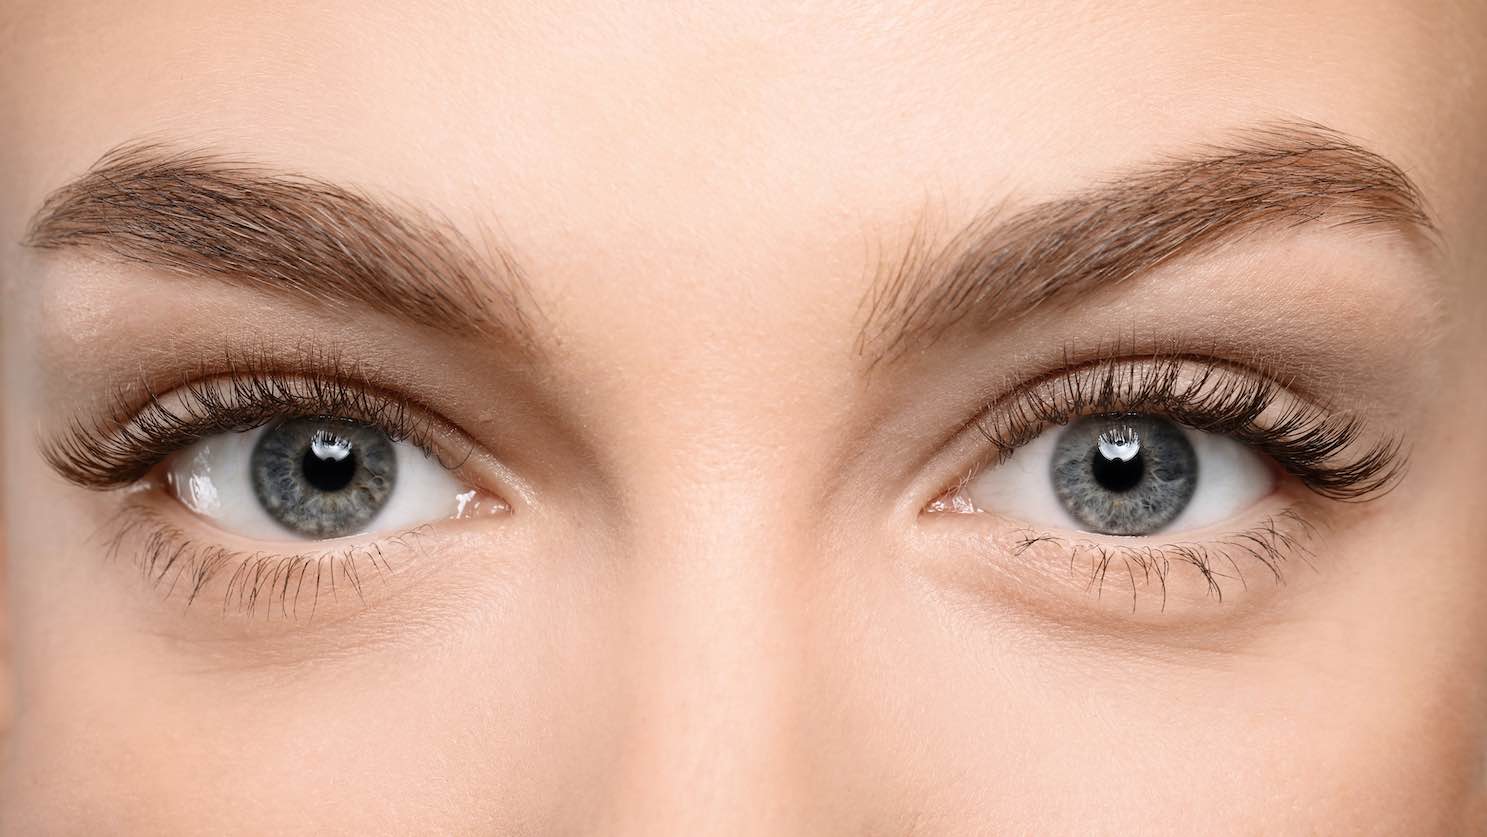 What Does Blepharoplasty Cost In Australia